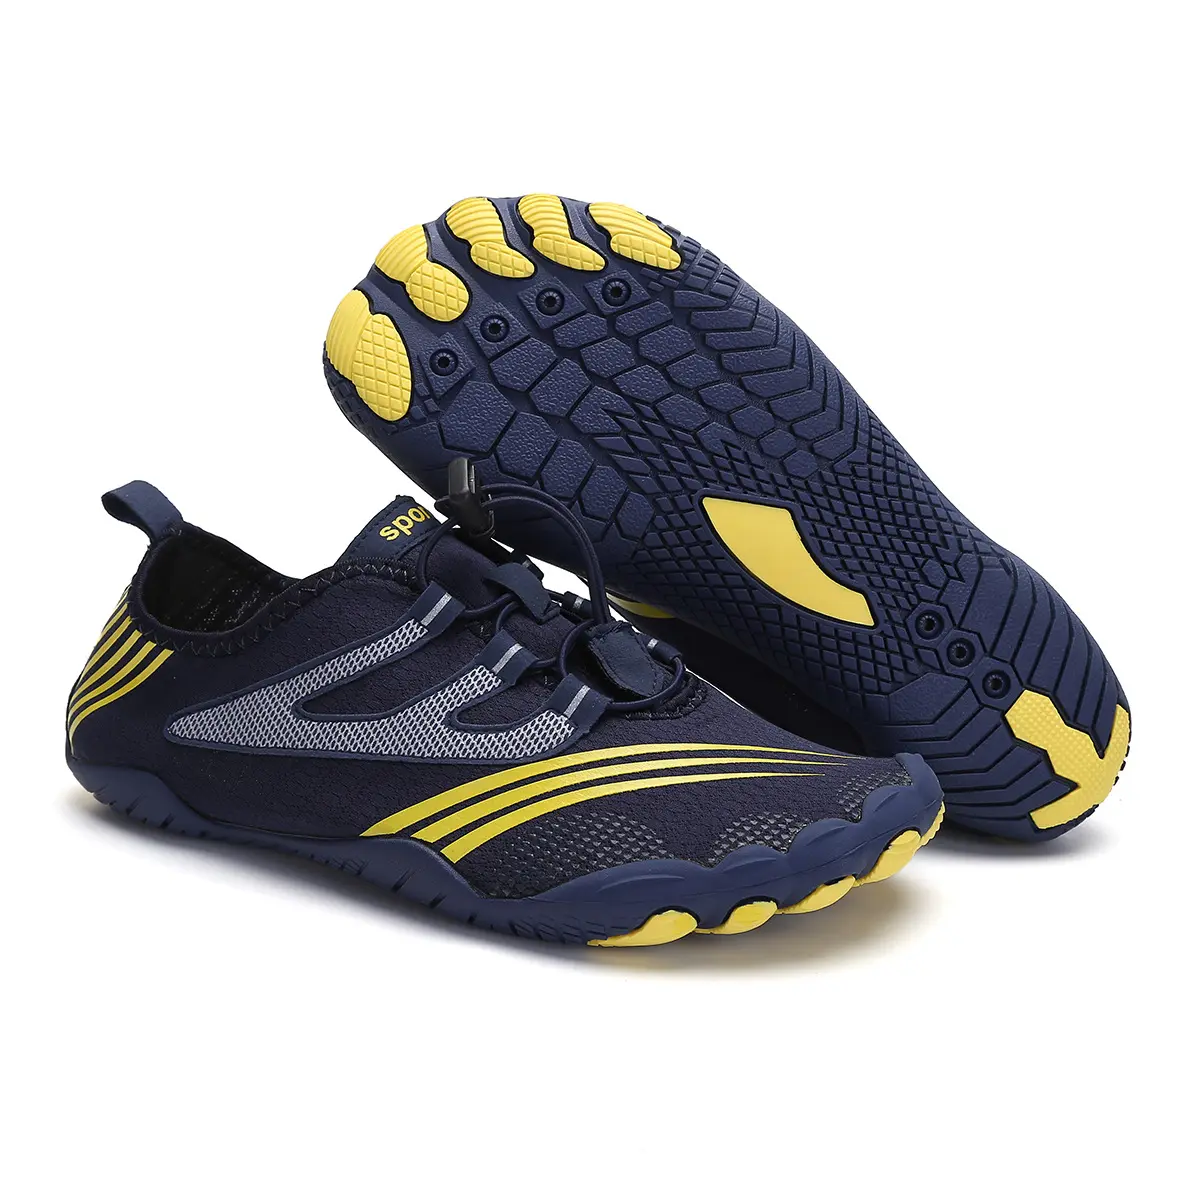 Outdoor wading beach barefoot diving shoes climbing five-finger shoes